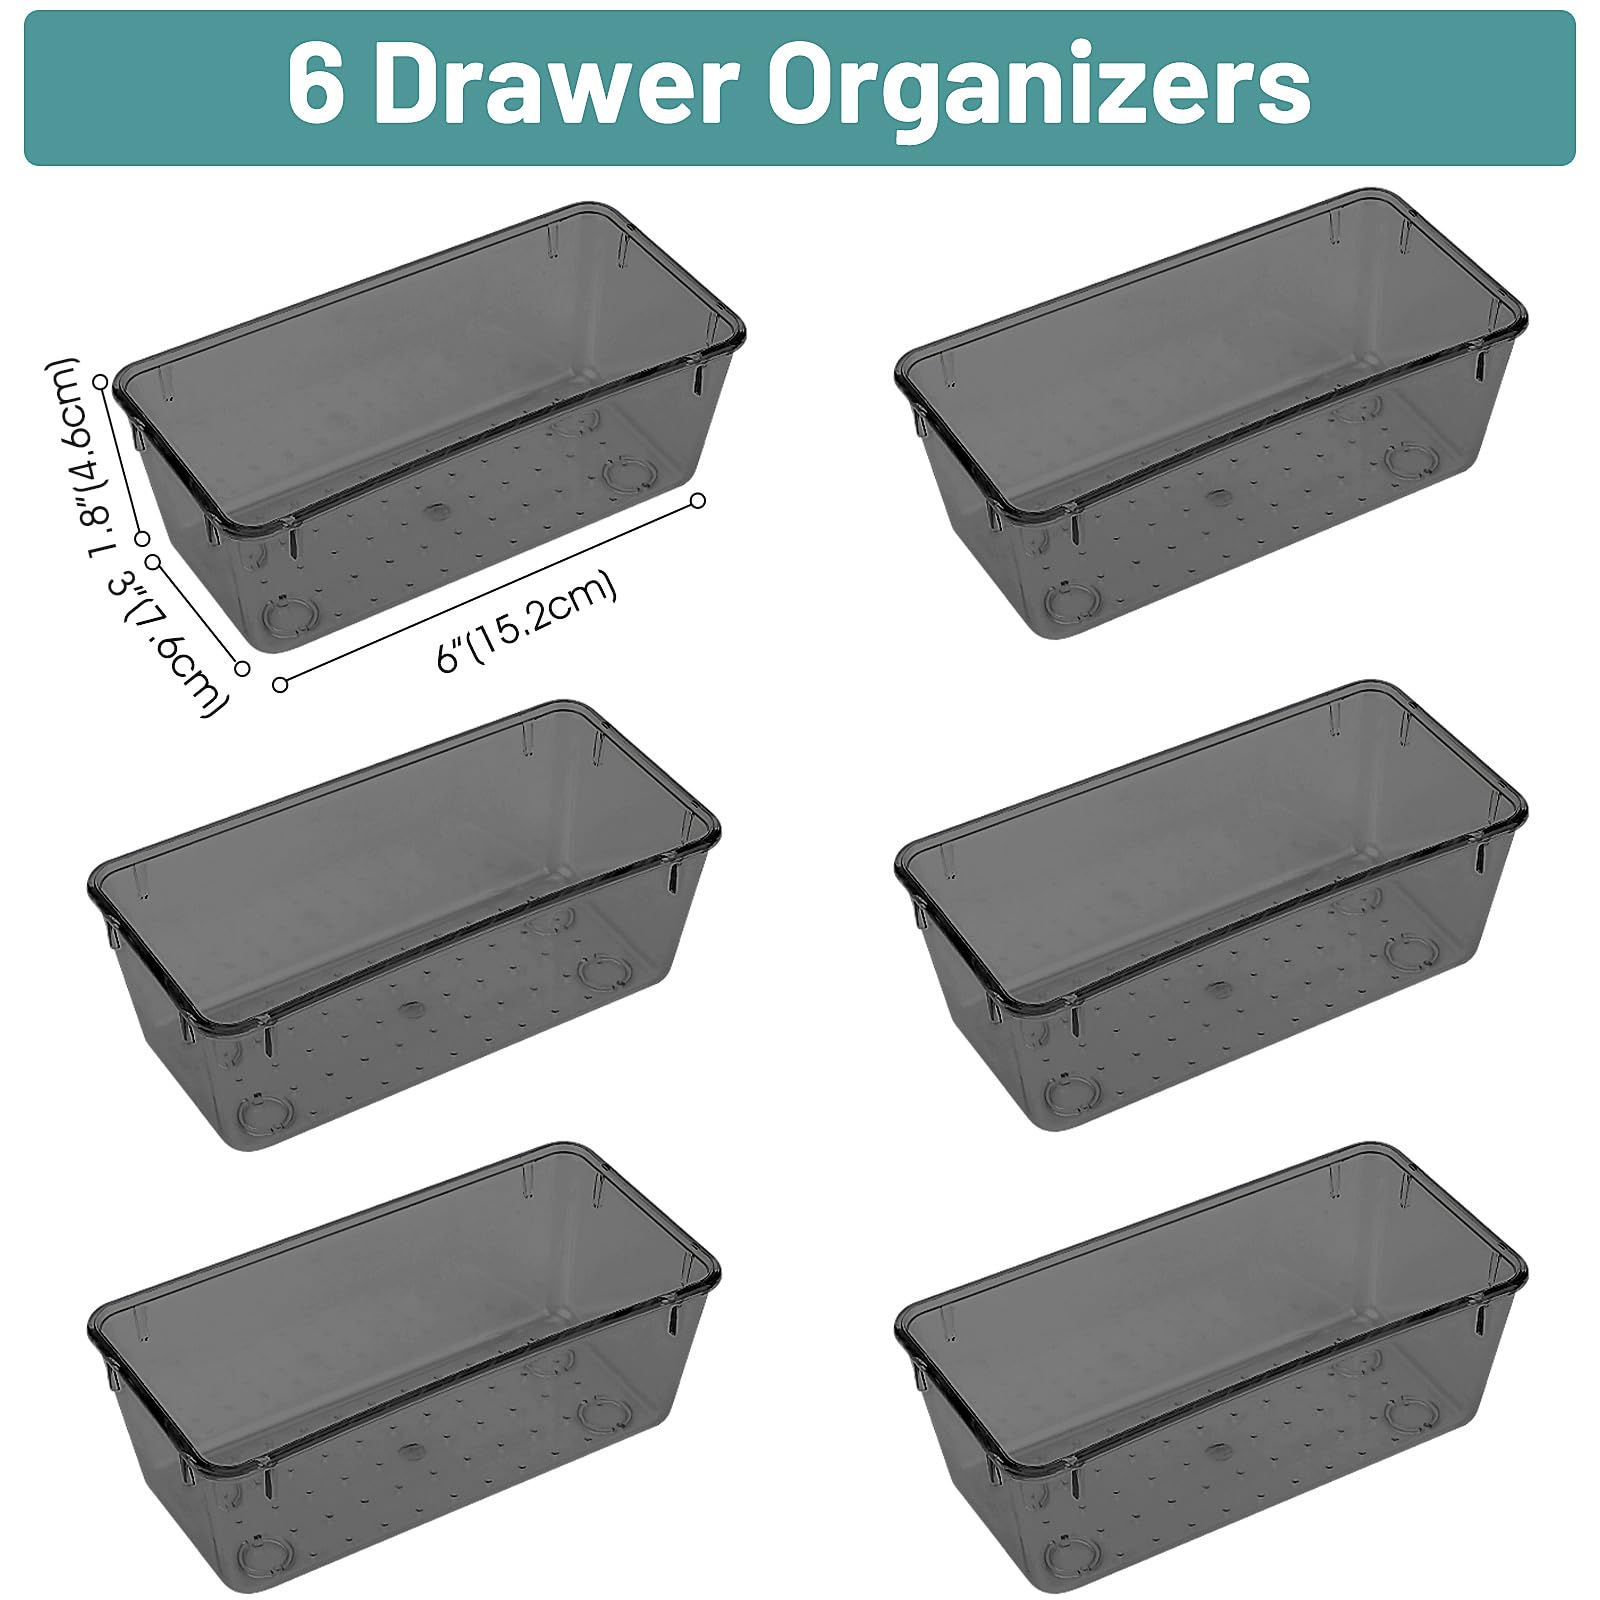 WOWBOX 6 PCS Plastic Drawer Organizer Set, Desk Drawer Divider Organizers and Storage Bins for Makeup, Jewelry, Gadgets for Kitchen, Bedroom, Bathroom, Office, Black